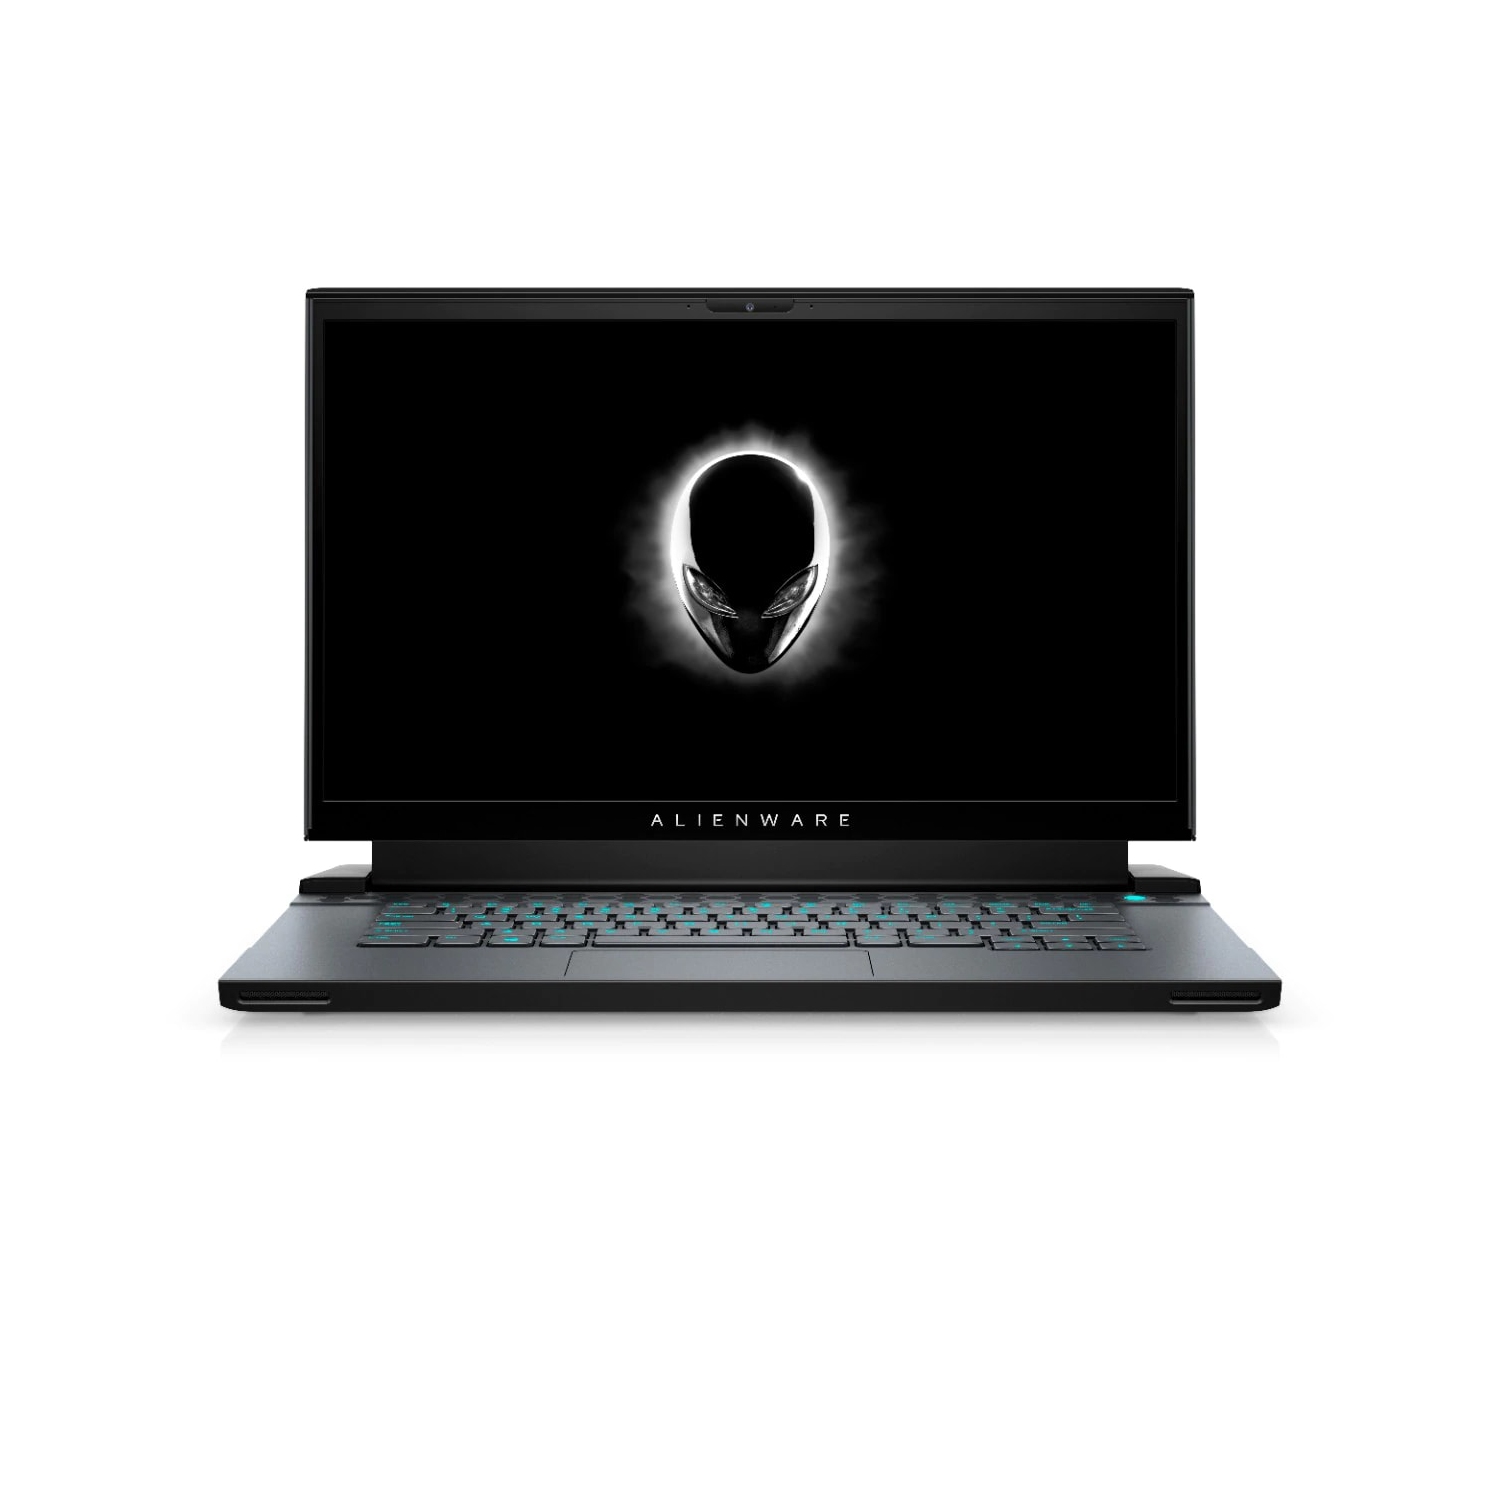 Refurbished (Excellent) - Dell Alienware m15 R4 Gaming Laptop (2021), 15.6" FHD, Core i7, 512GB SSD + 512GB SSD, 32GB RAM, RTX 3070, 5 GHz, 10th Gen CPU Certified